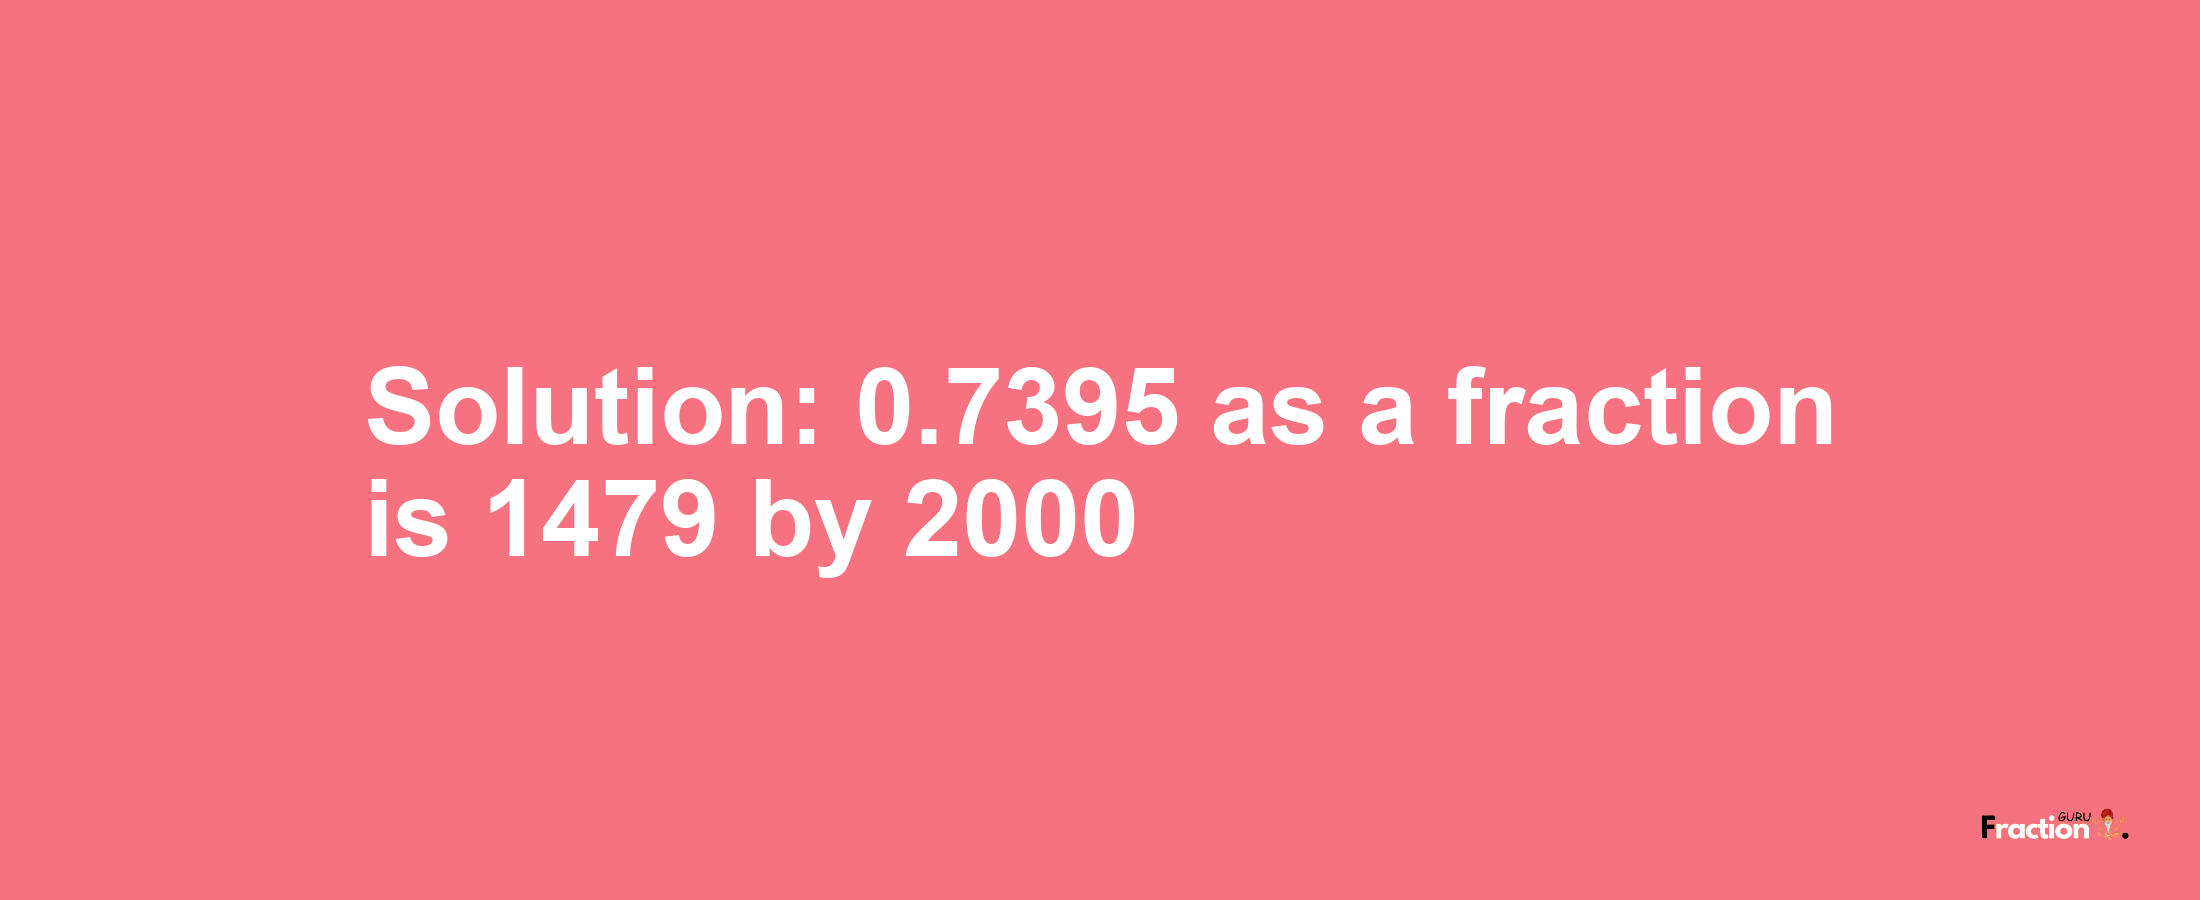 Solution:0.7395 as a fraction is 1479/2000